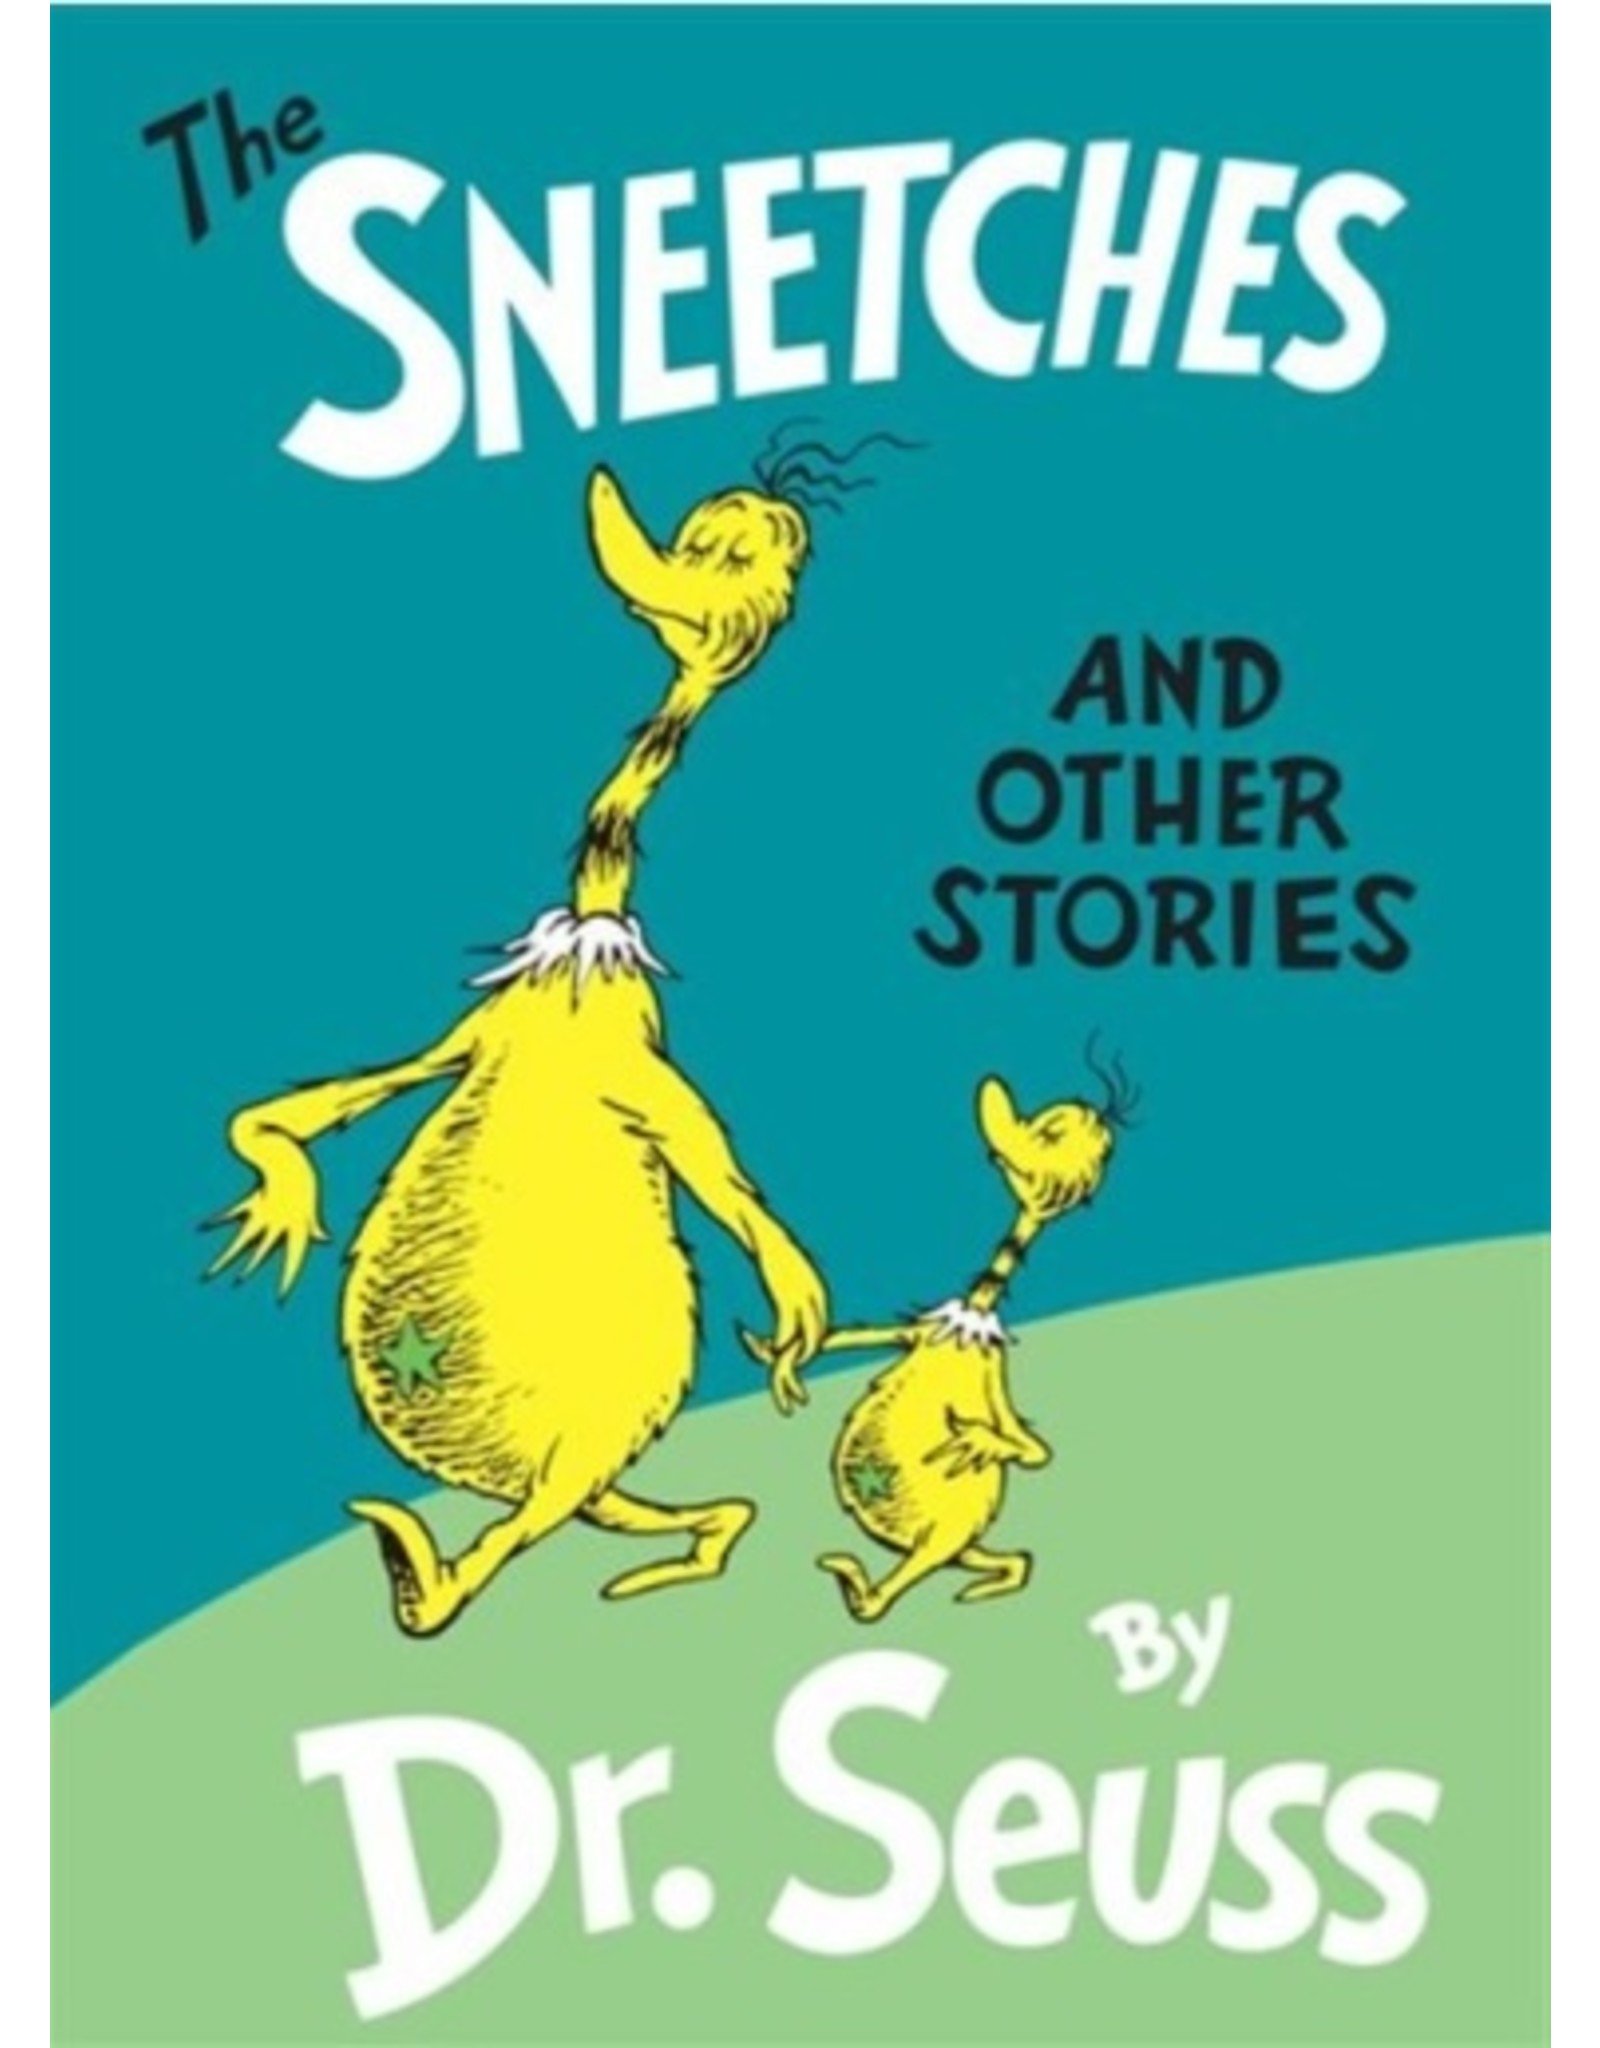 Dr. Seuss The Sneetches And Other Stories by Dr. Seuss - large